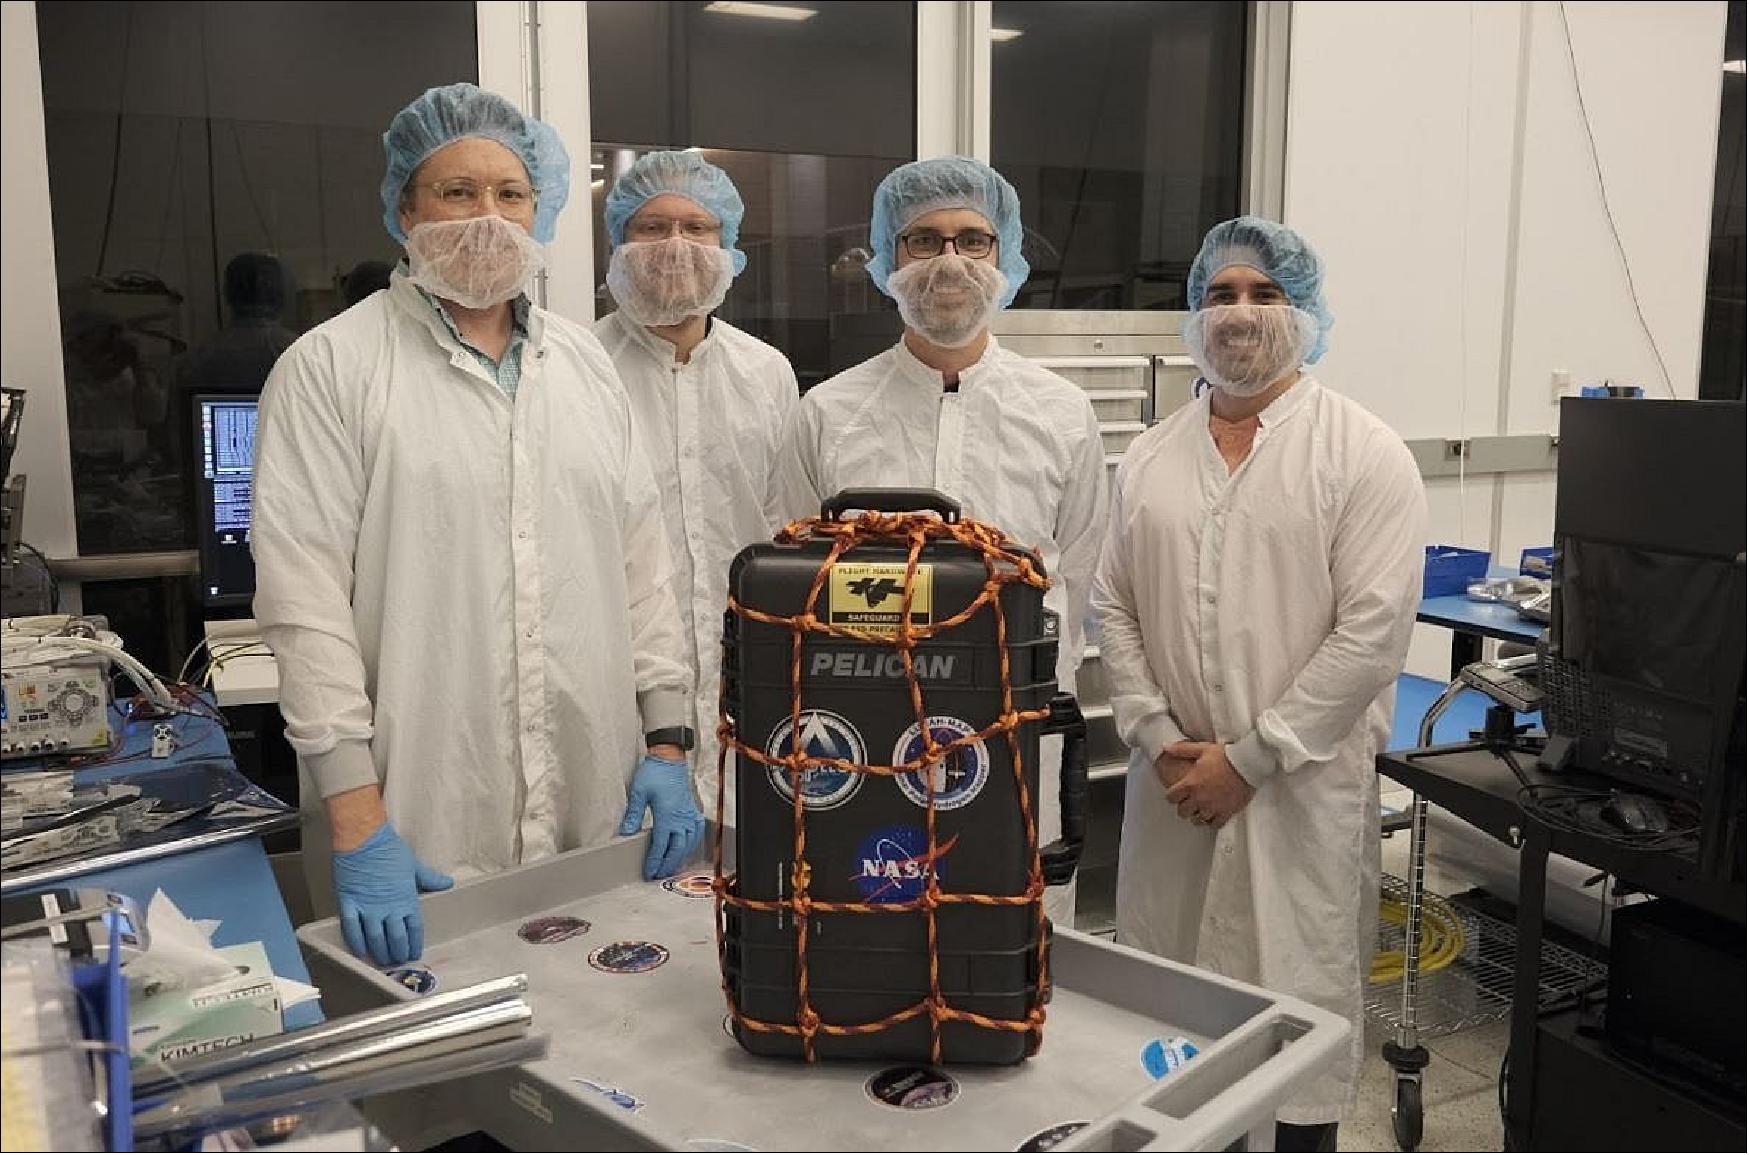 Figure 11: LunaH-Map ready for transport from the ASU Tempe campus to NASA's Kennedy Space Center. Left to right: Joe DuBois, Nathaniel Struebel, Craig Hardgrove and Tyler O'Brien (image credit: ASU)